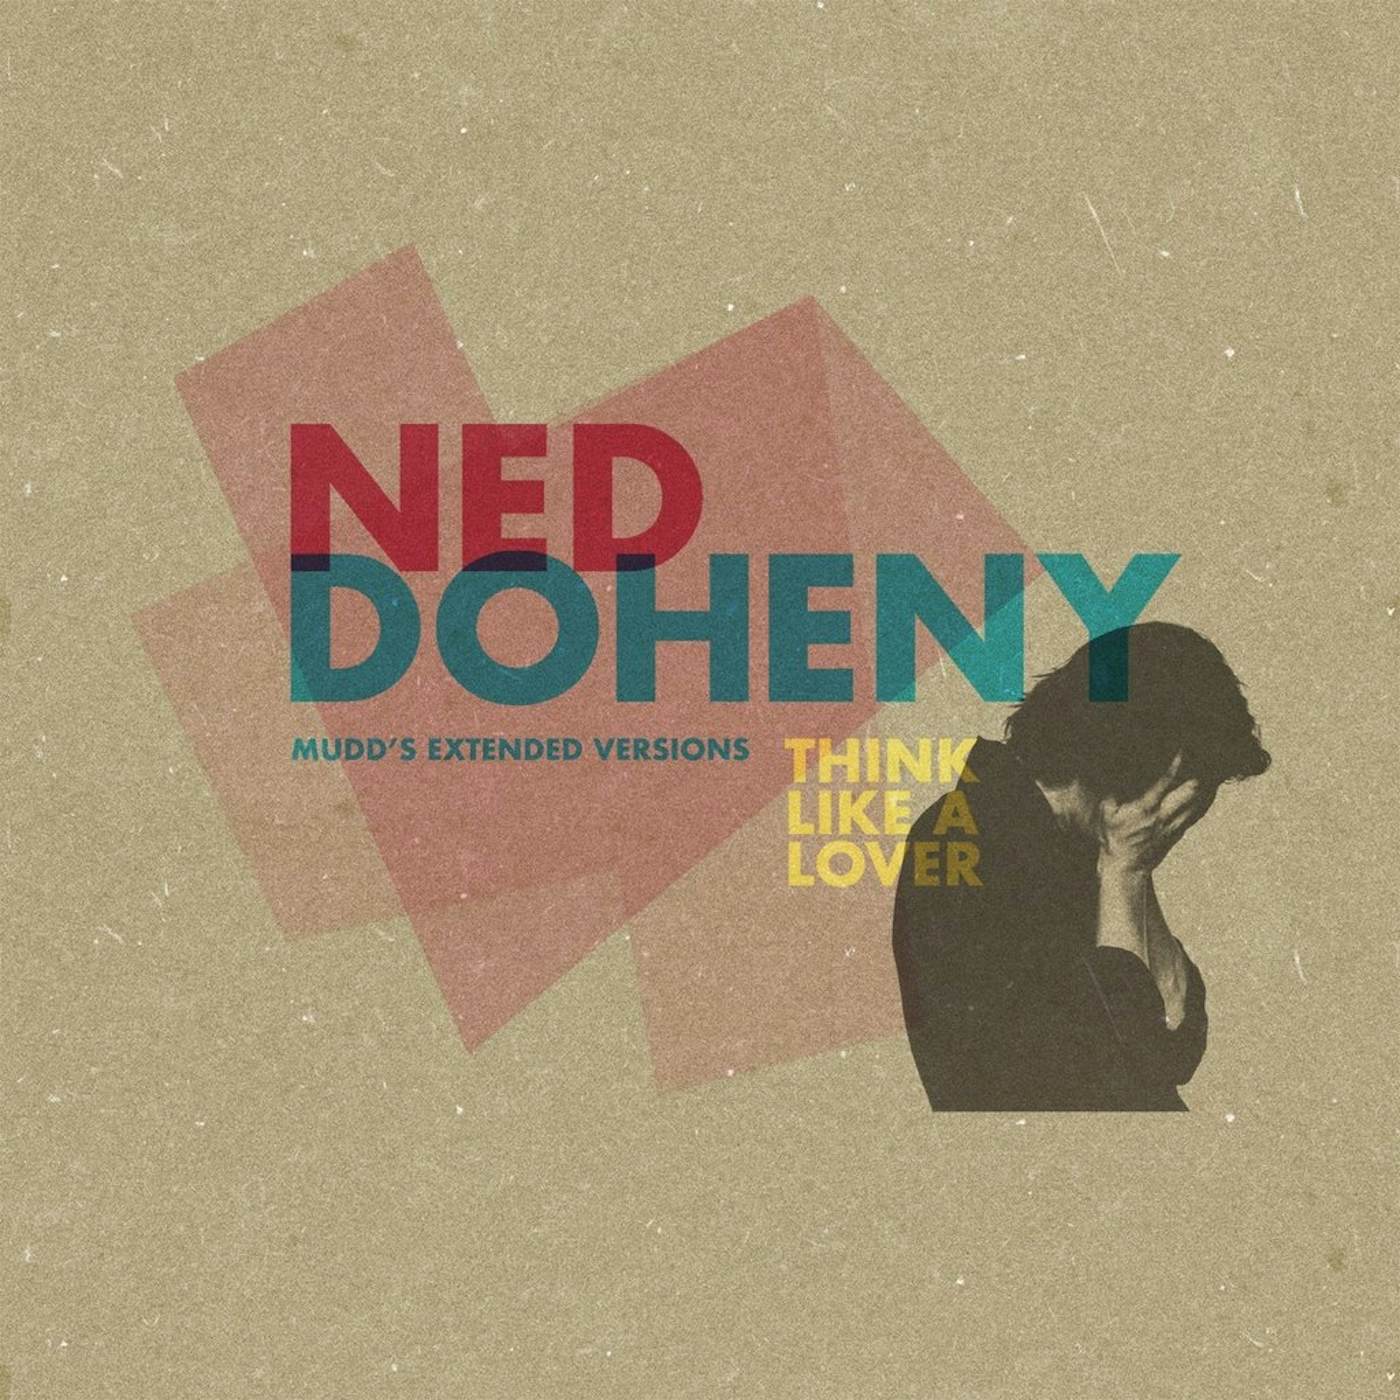 Ned Doheny THINK LIKE A LOVER (MUDD'S EXTENDED VERSIONS) Vinyl Record